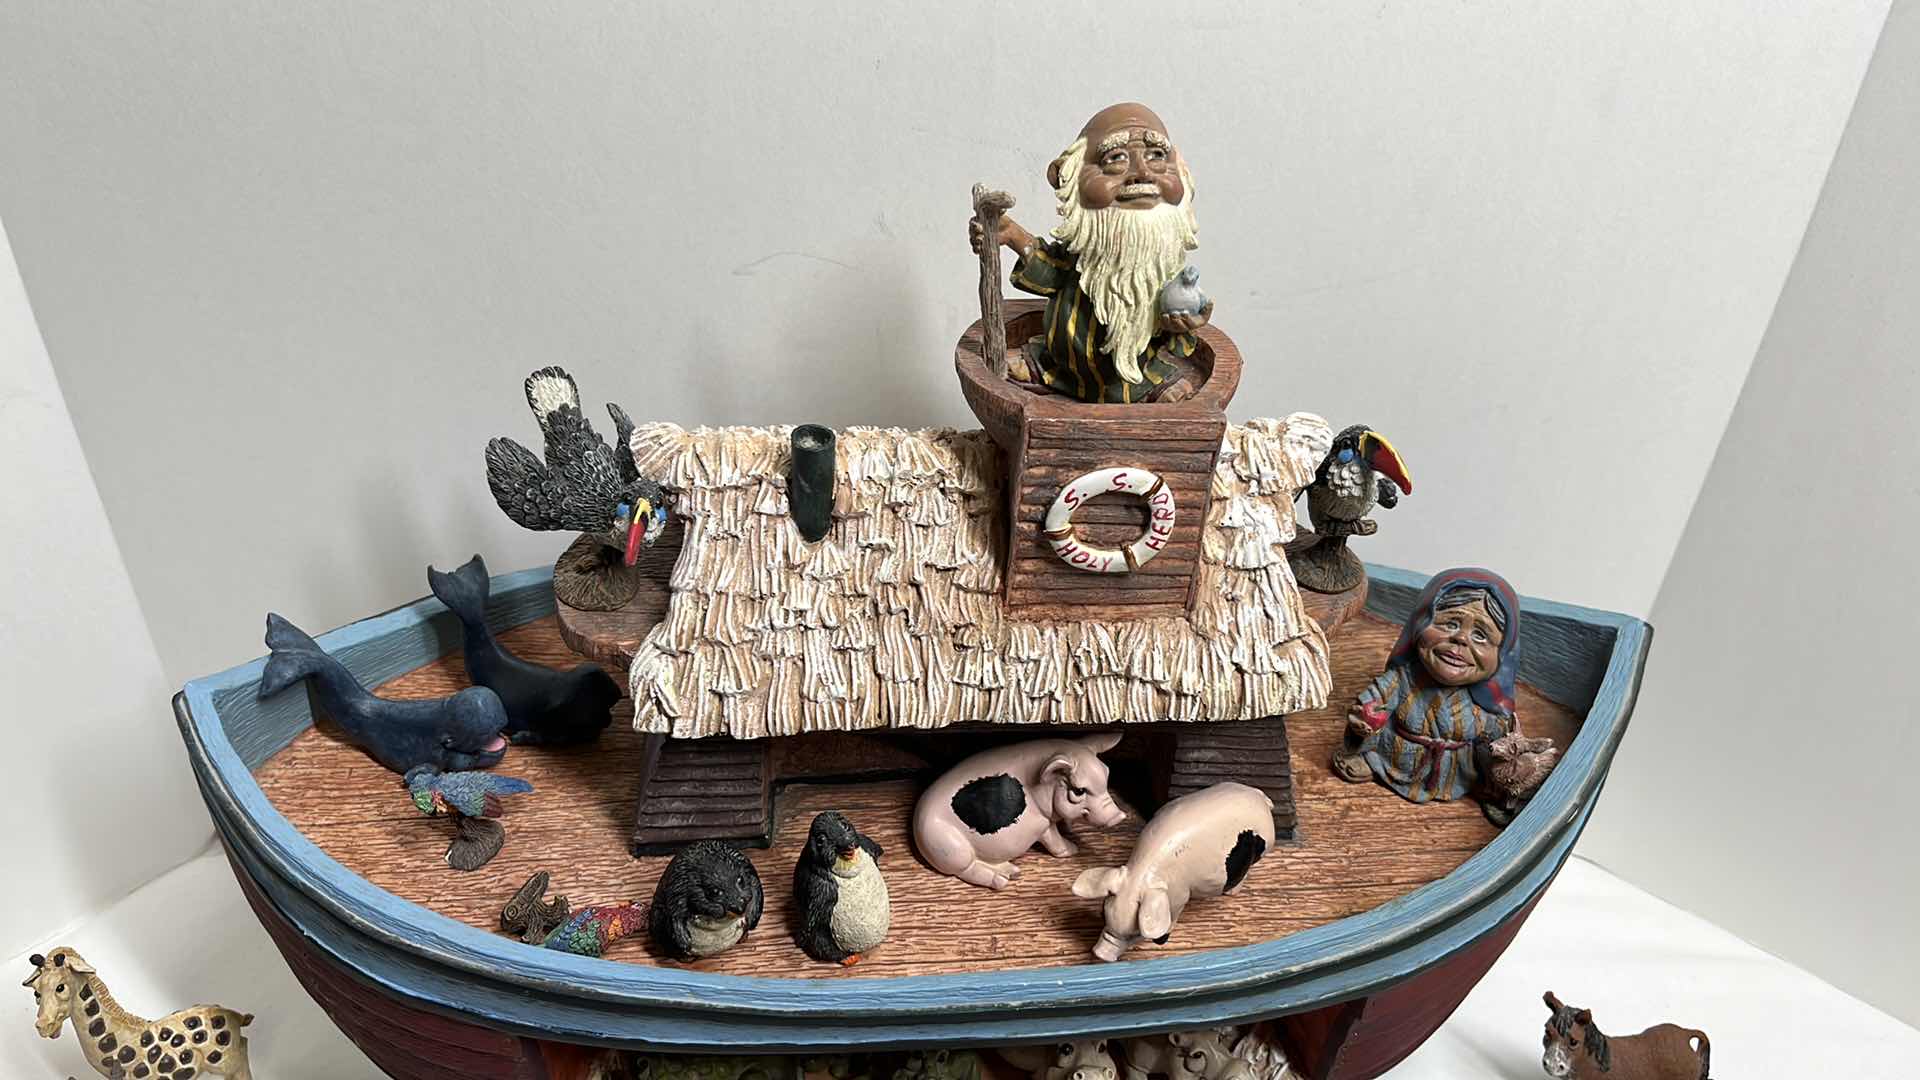 Photo 2 of NOAH’S ARK S.S. HOLY HERD COLLECTIBLES W NOAH & HIS WIFE & 34 ANIMAL FIGURINES 8.25” X 18.5” H12.5”